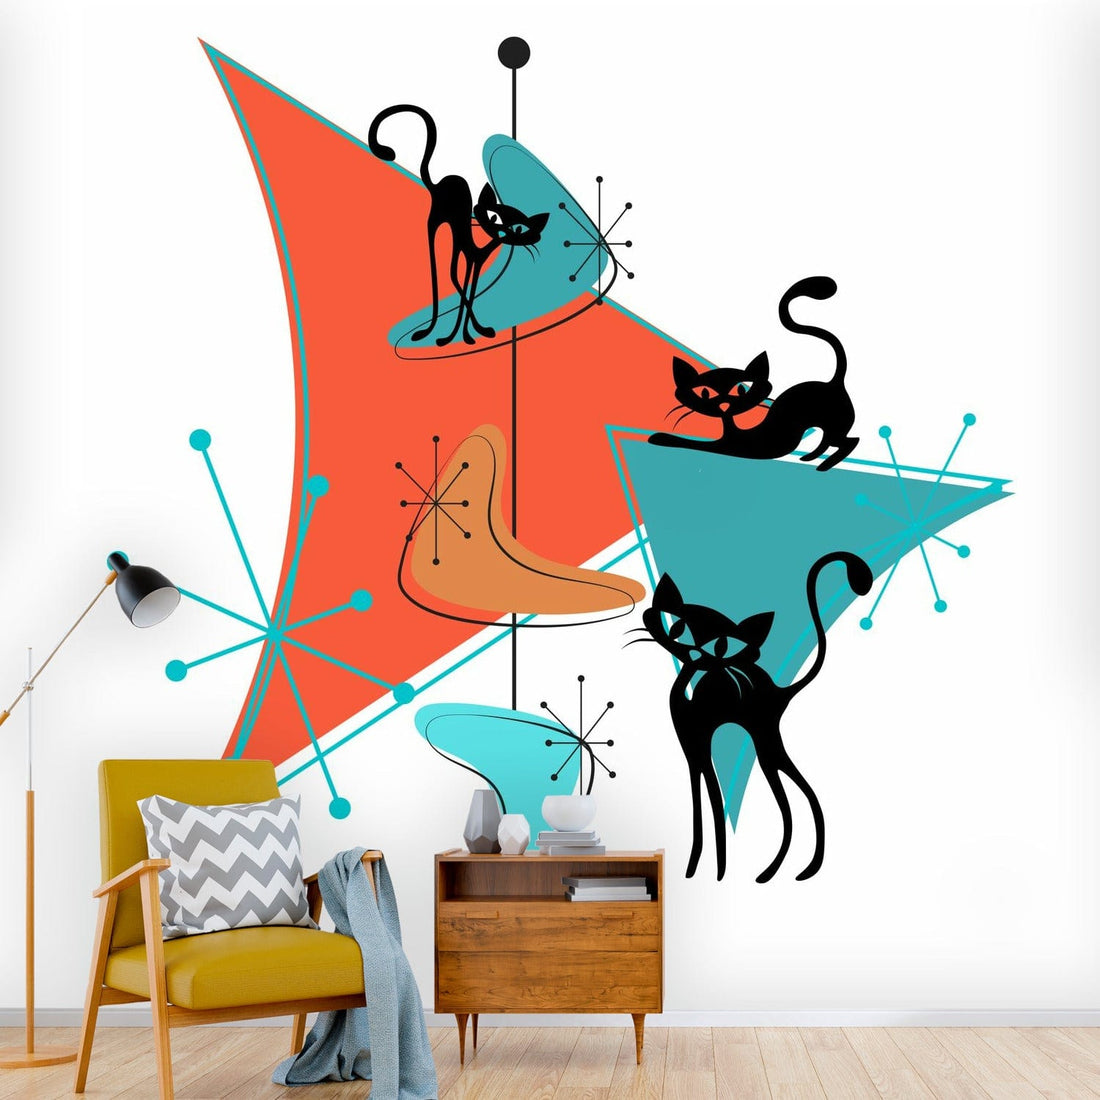 Atomic Cat Designed Peel And Stick, Kitschy Mid Century Modern Wall Paper Wall Mural Wallpaper H110 x W120